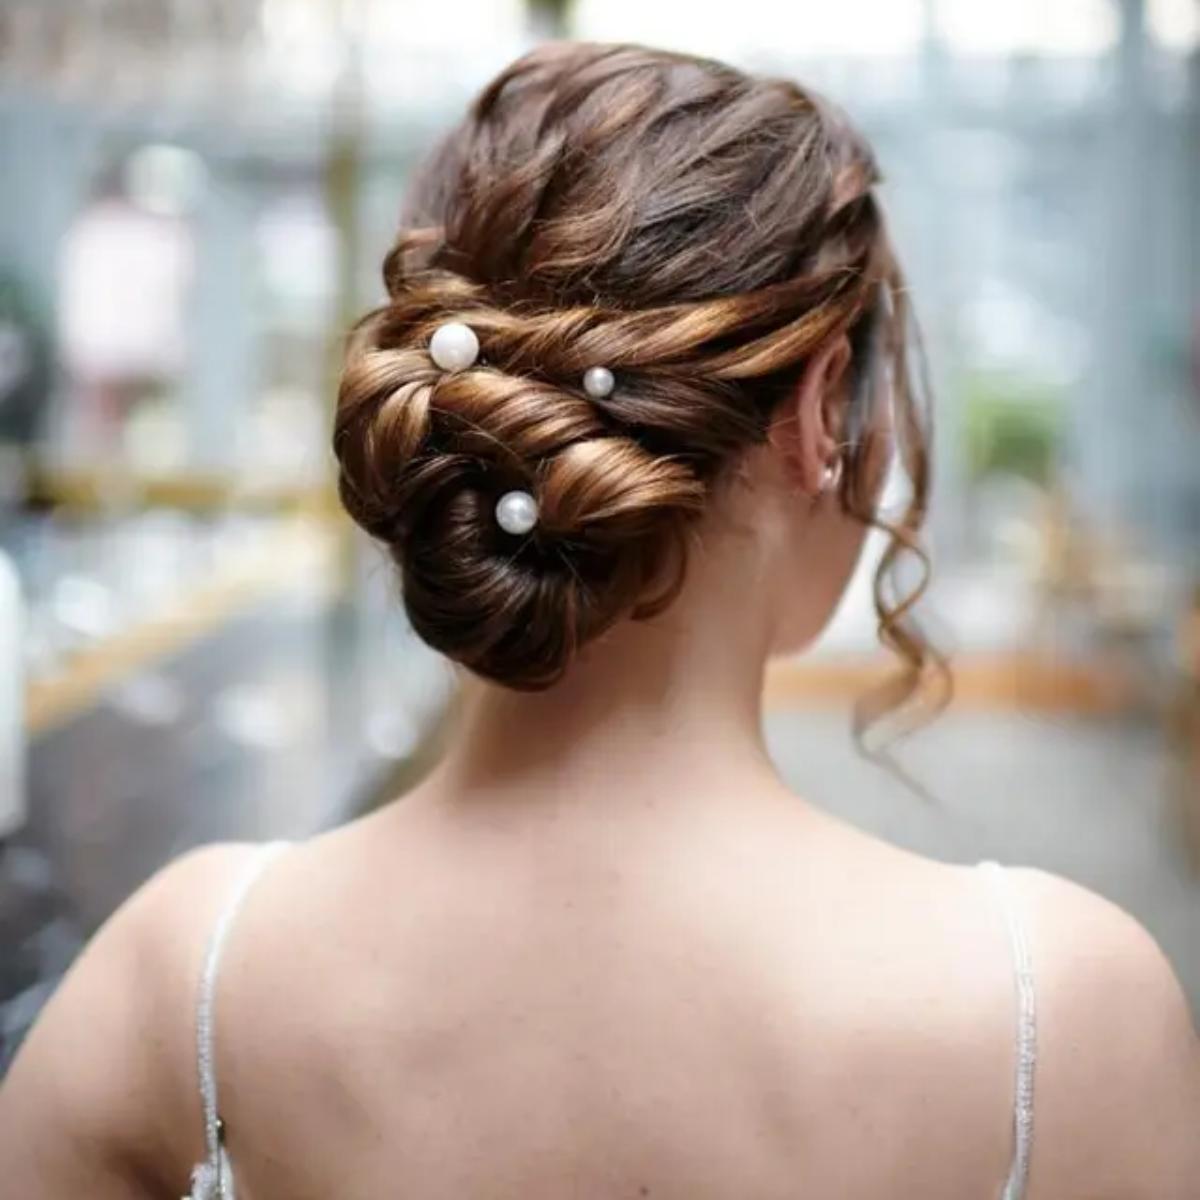 15 Ponytail Hairstyles That Elevate This Classic Updo